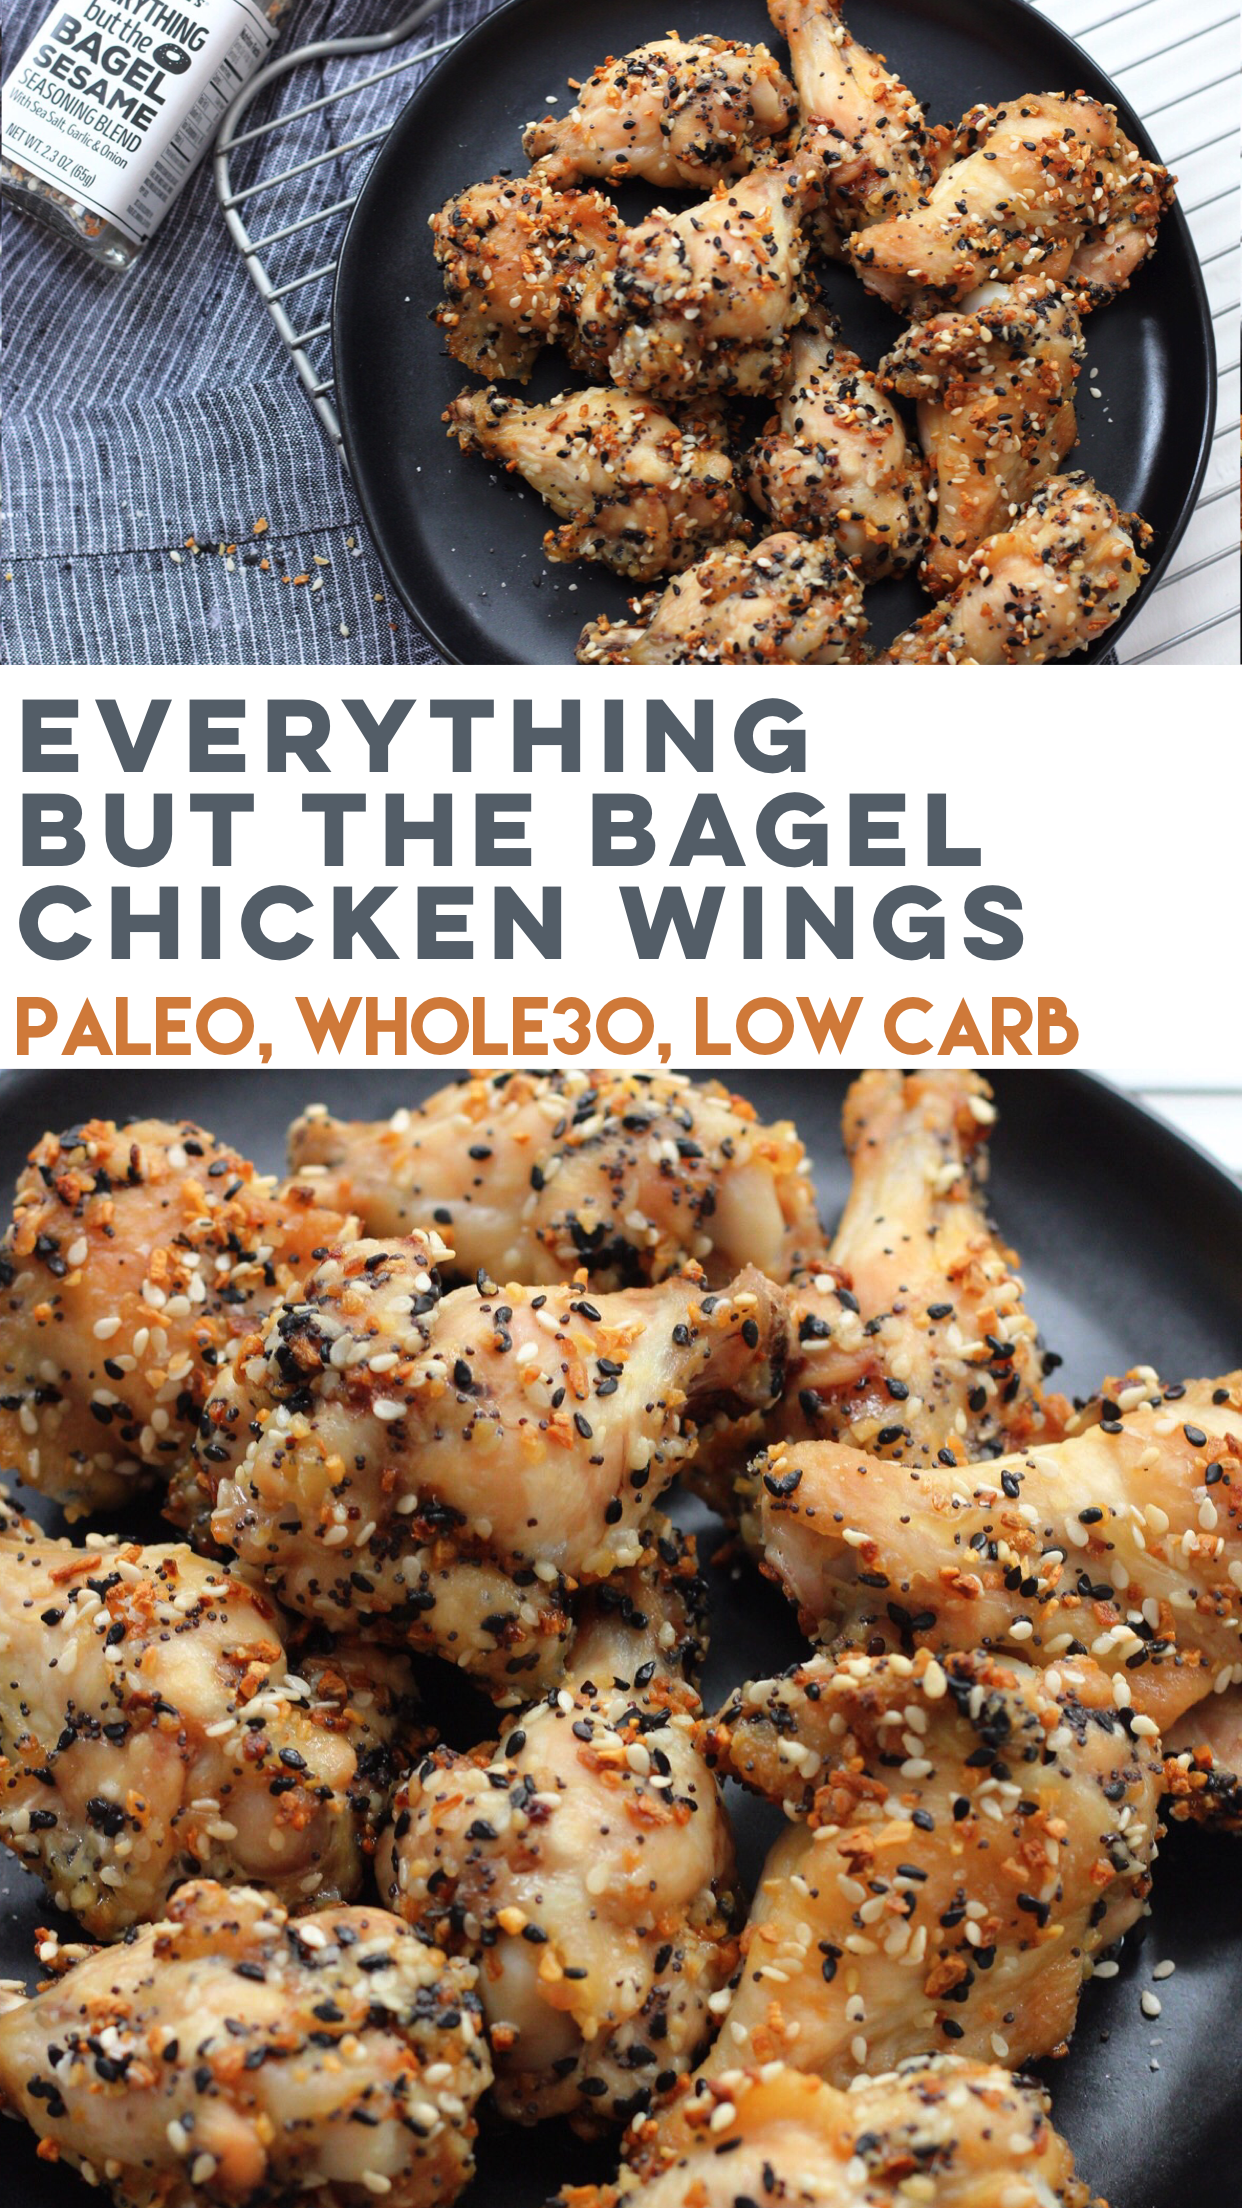 Everything but the bagel chicken wings are a family friendly recipe that's simple and delicious. It's Paleo, Whole30 and this low carb chicken wing recipe is baked and not fried. The perfect paleo appetizer, snack or Whole30 game day recipe! #paleochickenwing #whole30chickenrecipes #chickenwings via @paleobailey